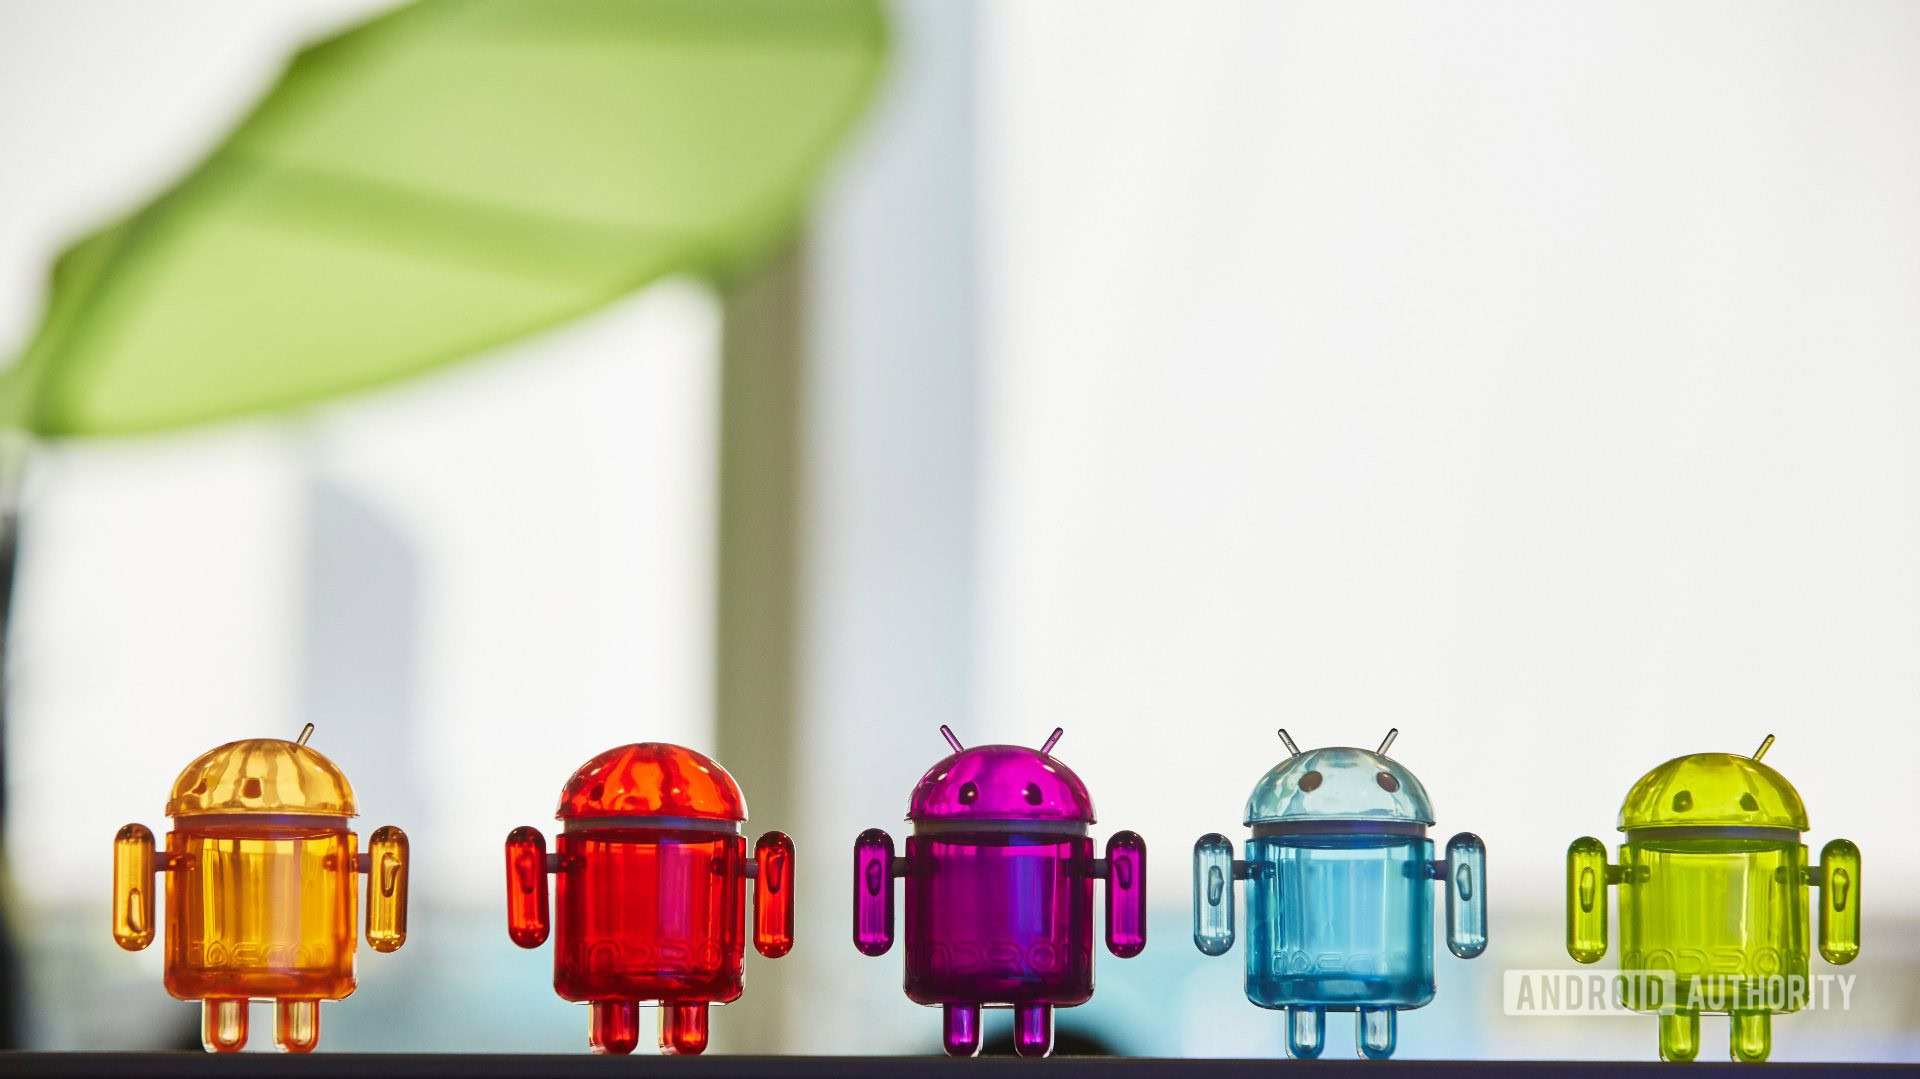 https://www.androidauthority.com/wp-content/uploads/2022/08/android-figures-cropped-1.jpg